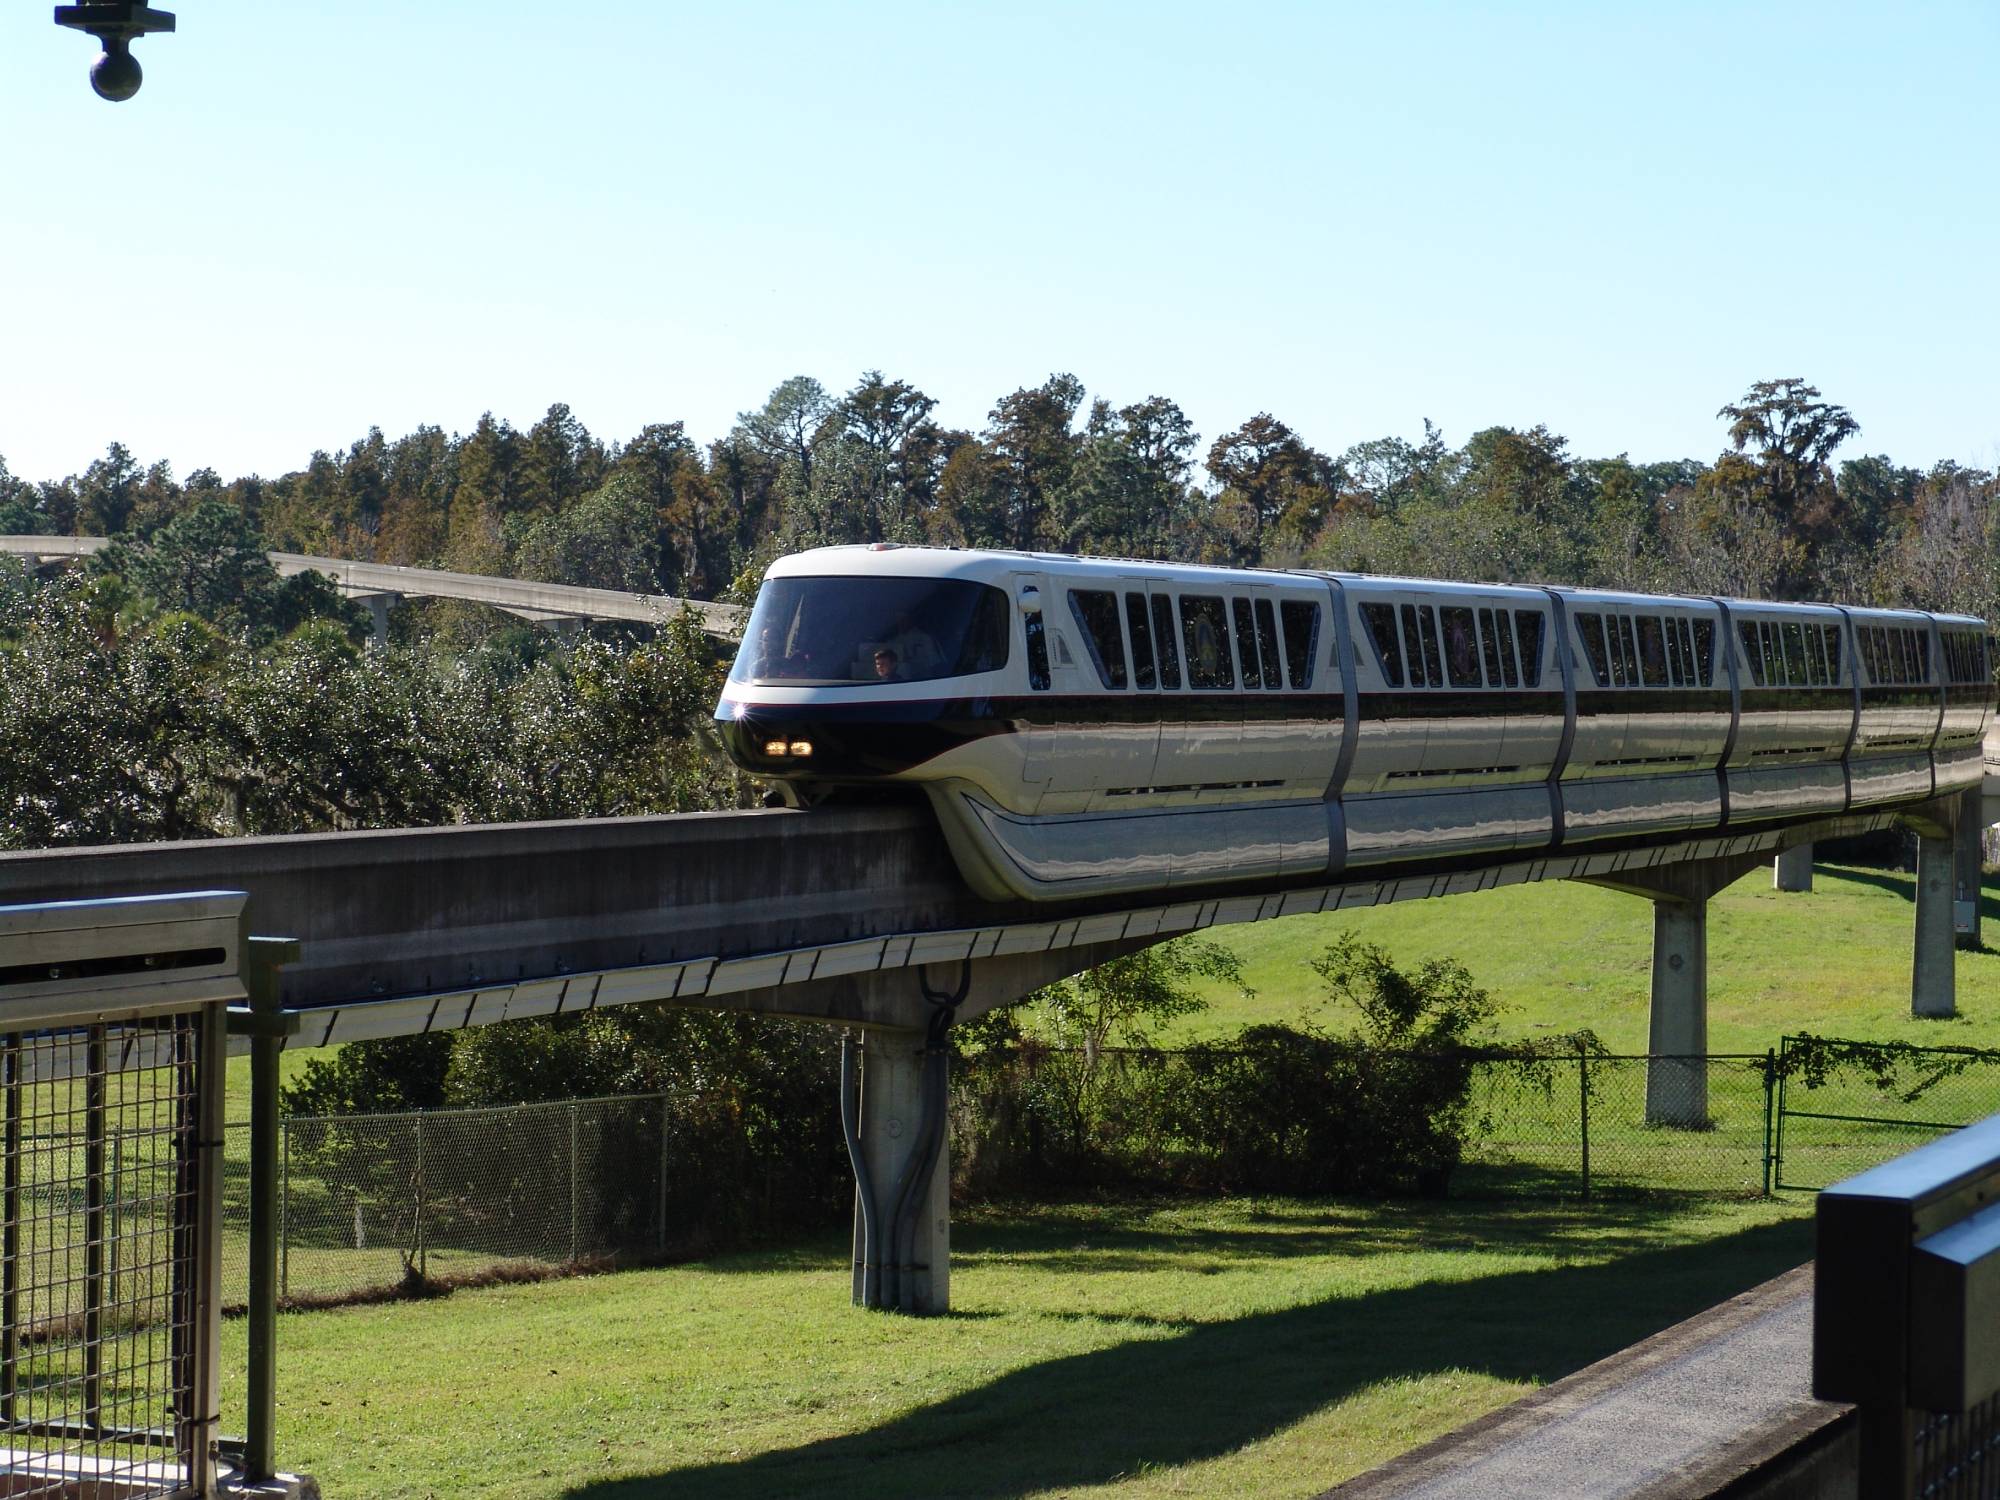 Monorail out on the tracks